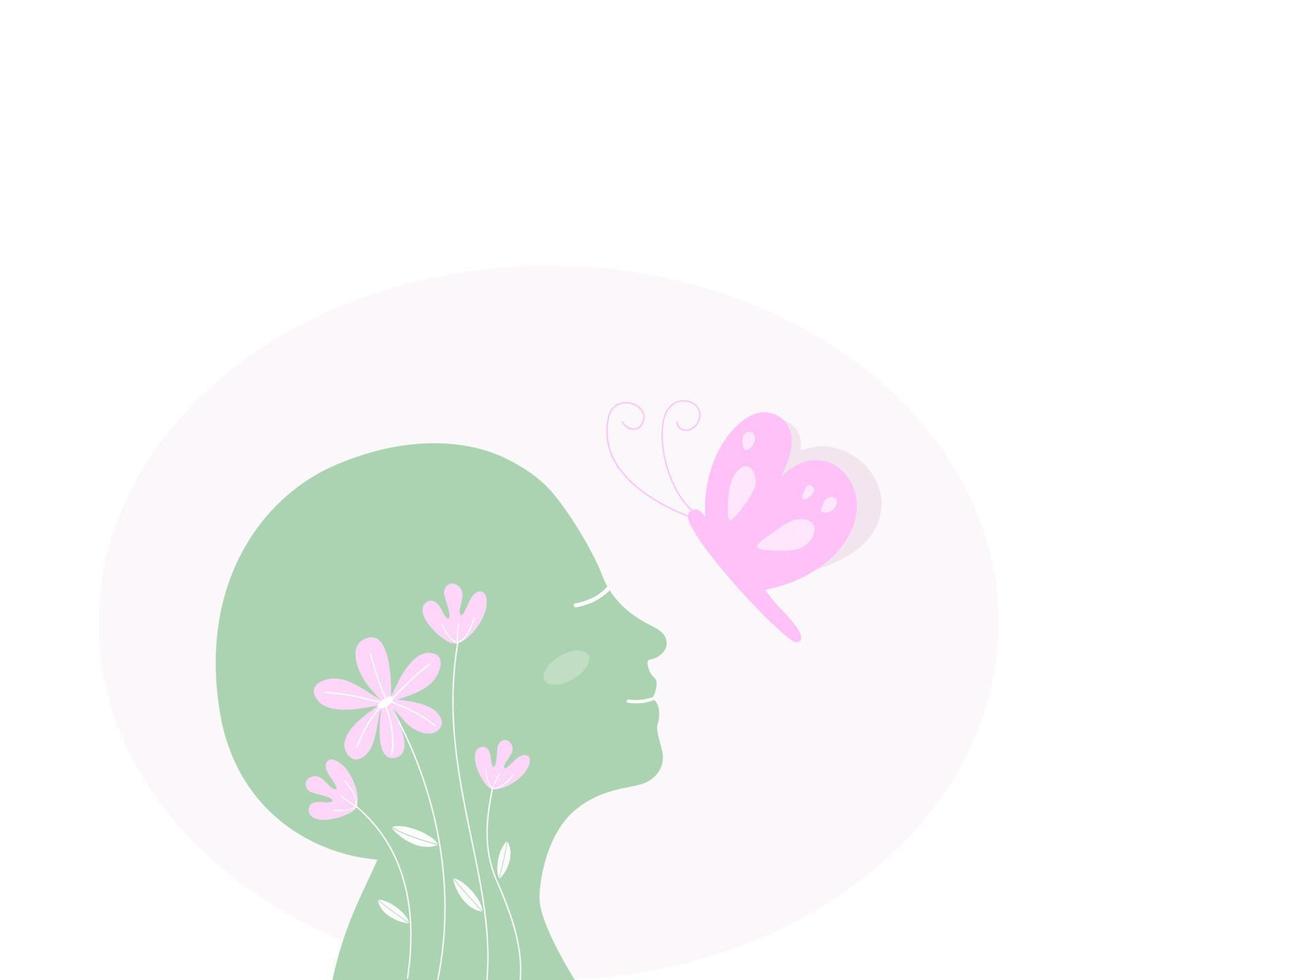 A silhouette of human smilling and happy emotion with flowers and butterfly, mental health concept. flat vector illustration.